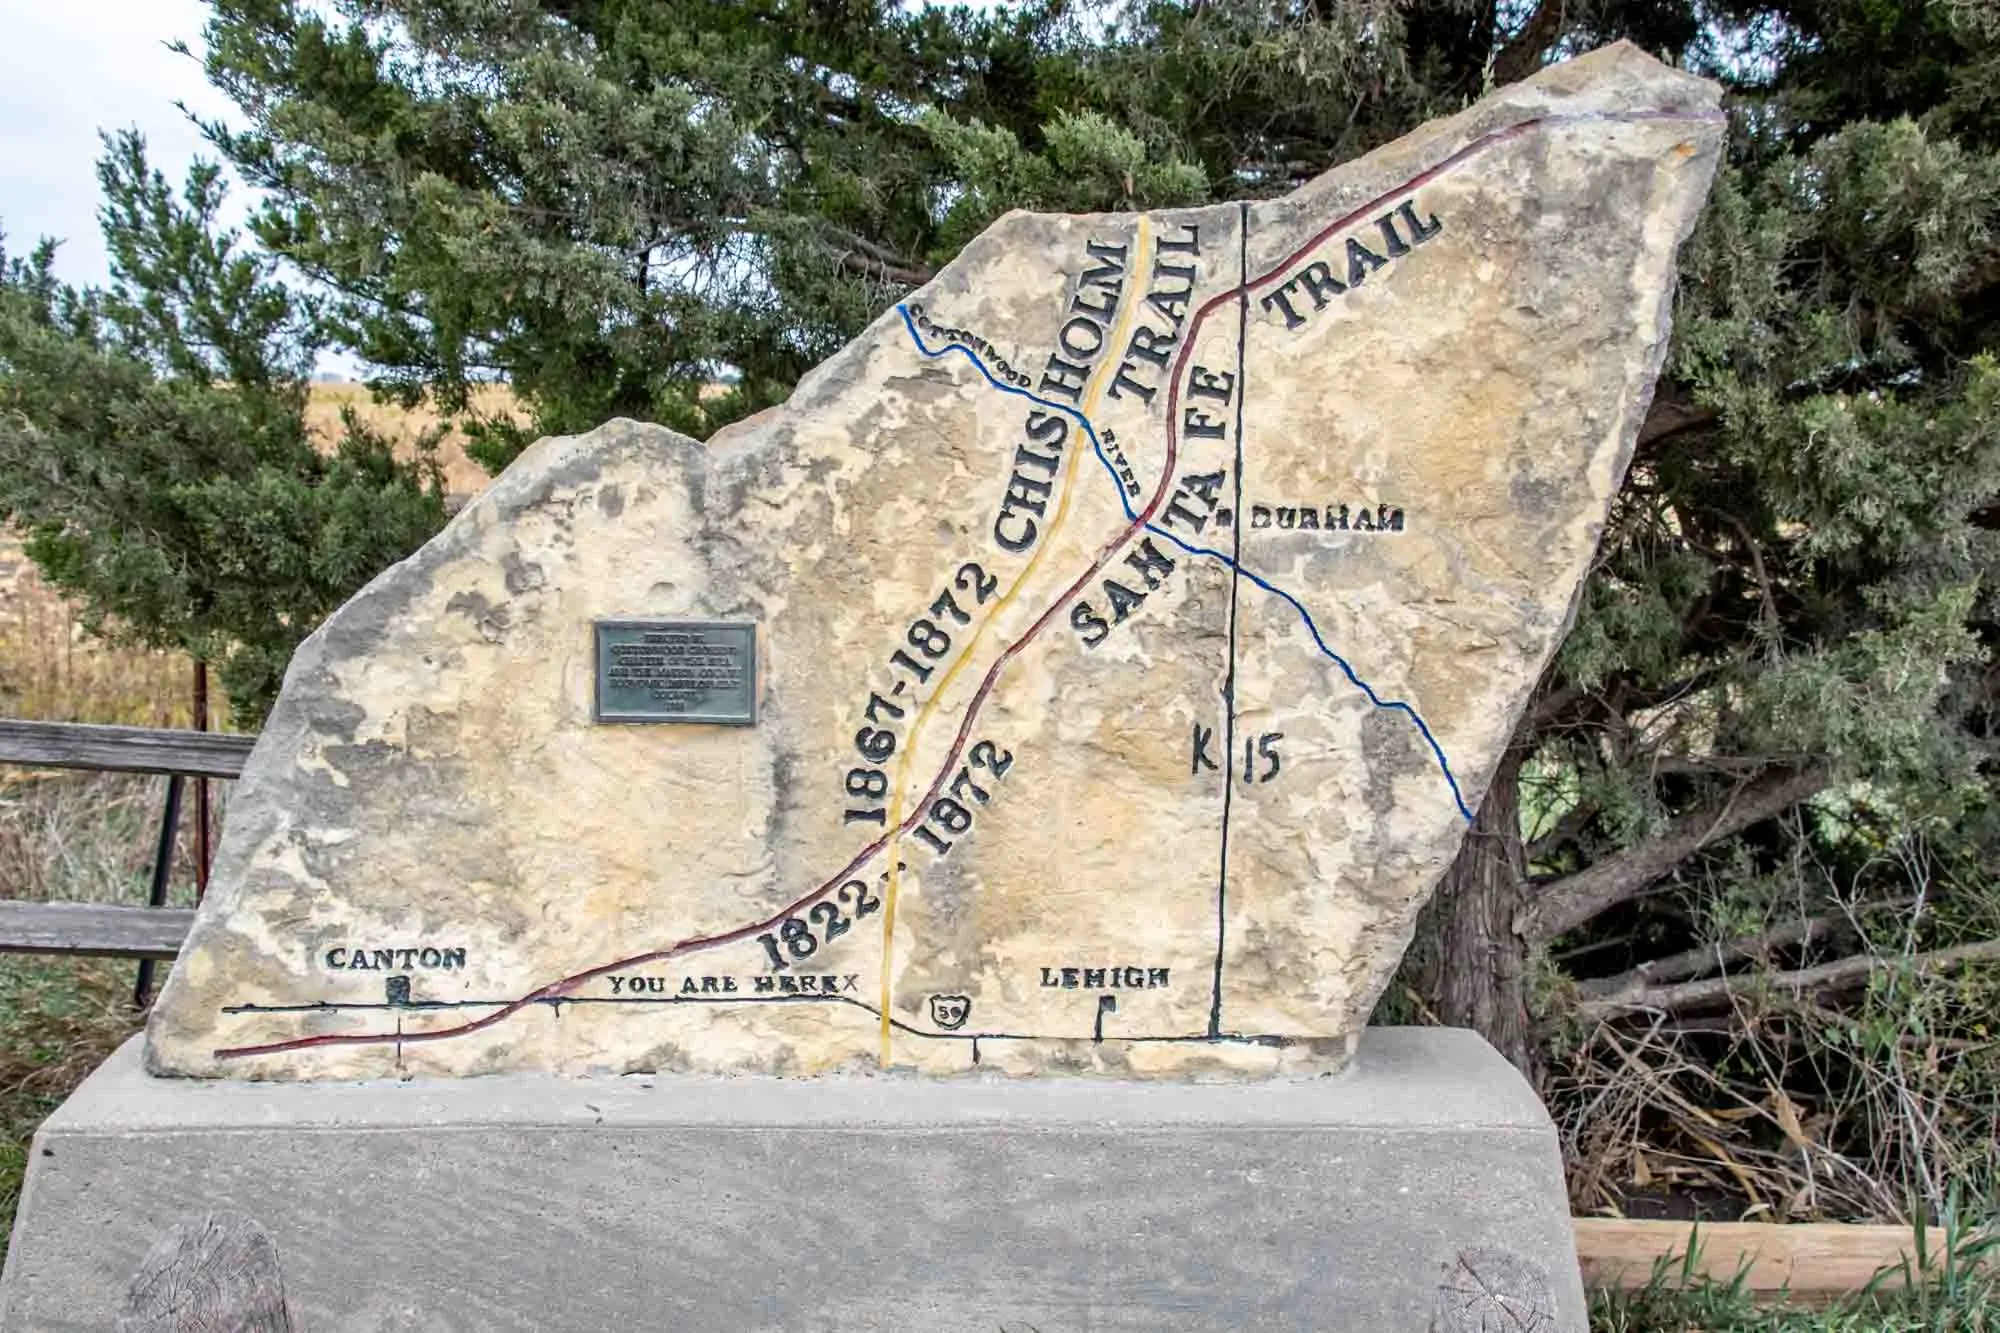 Map carved into limestone depicting the crossing of the Chisholm Trail and the Santa Fe Trail